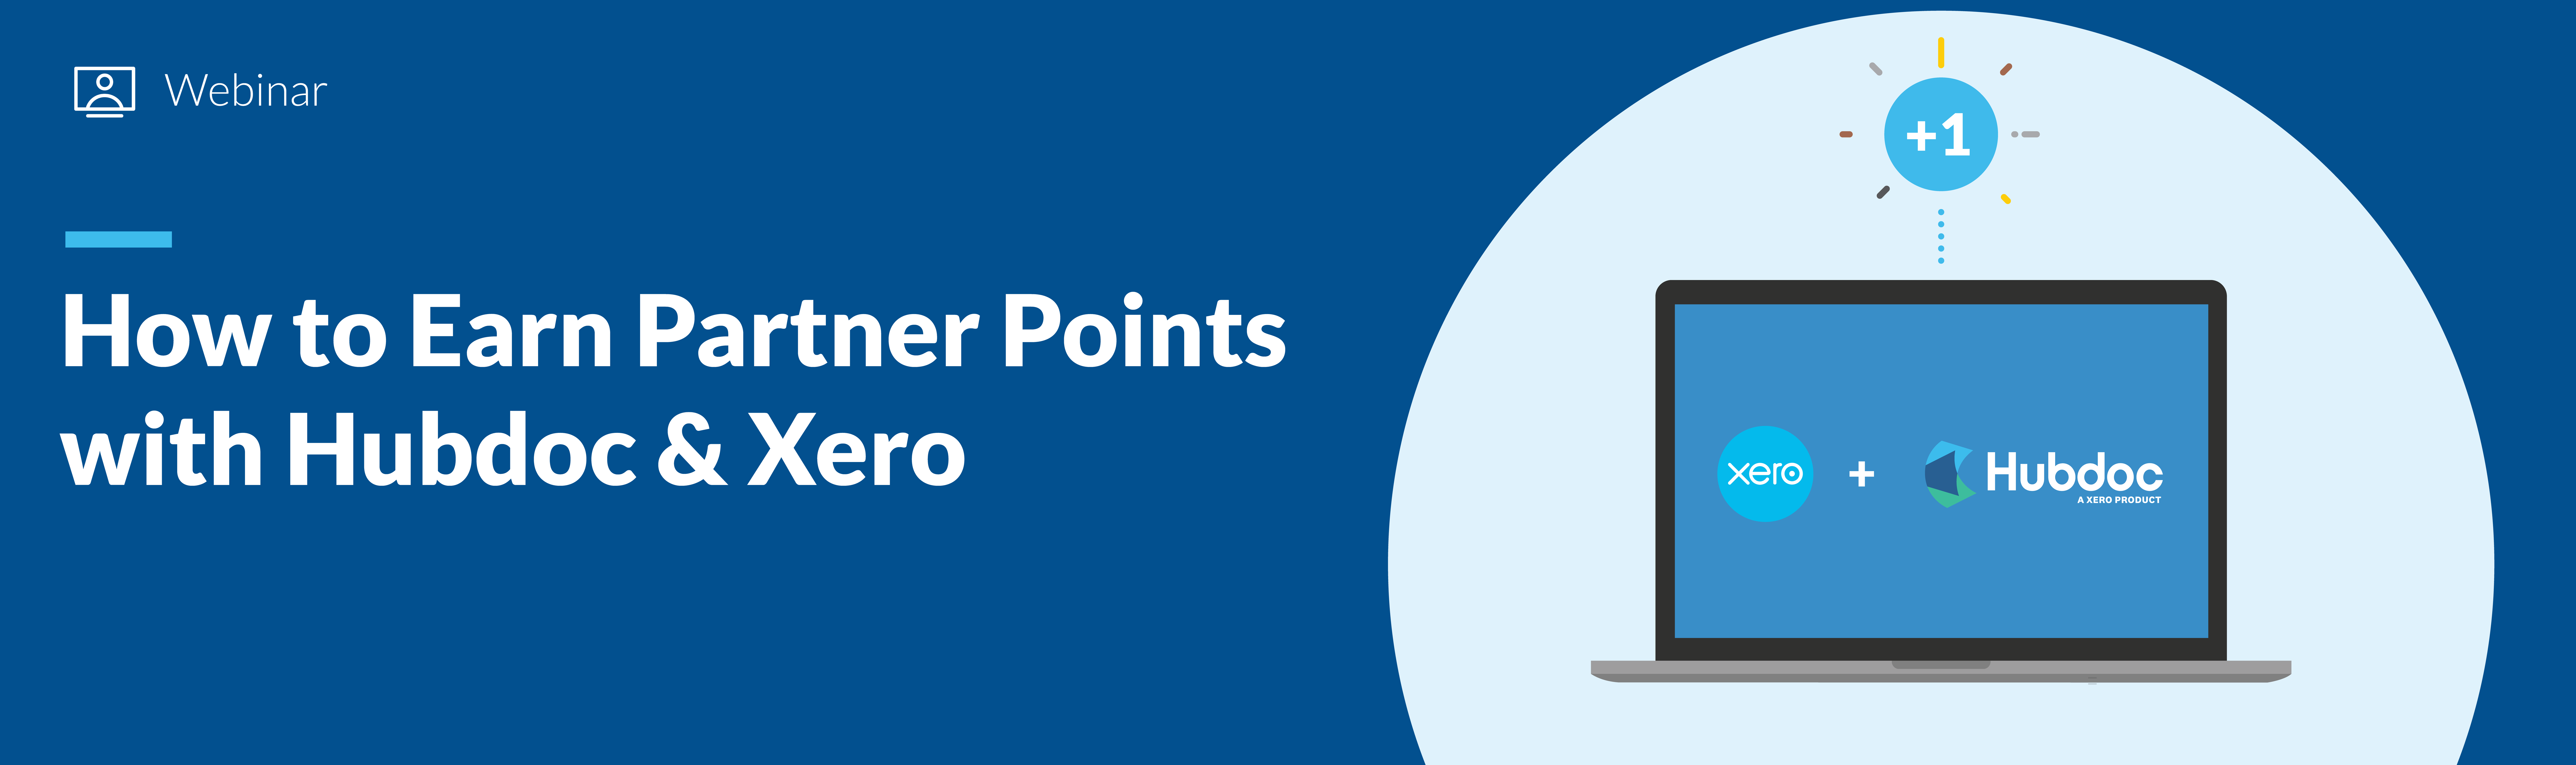 How to Earn Partner Points with Hubdoc & Xero [NZ] 